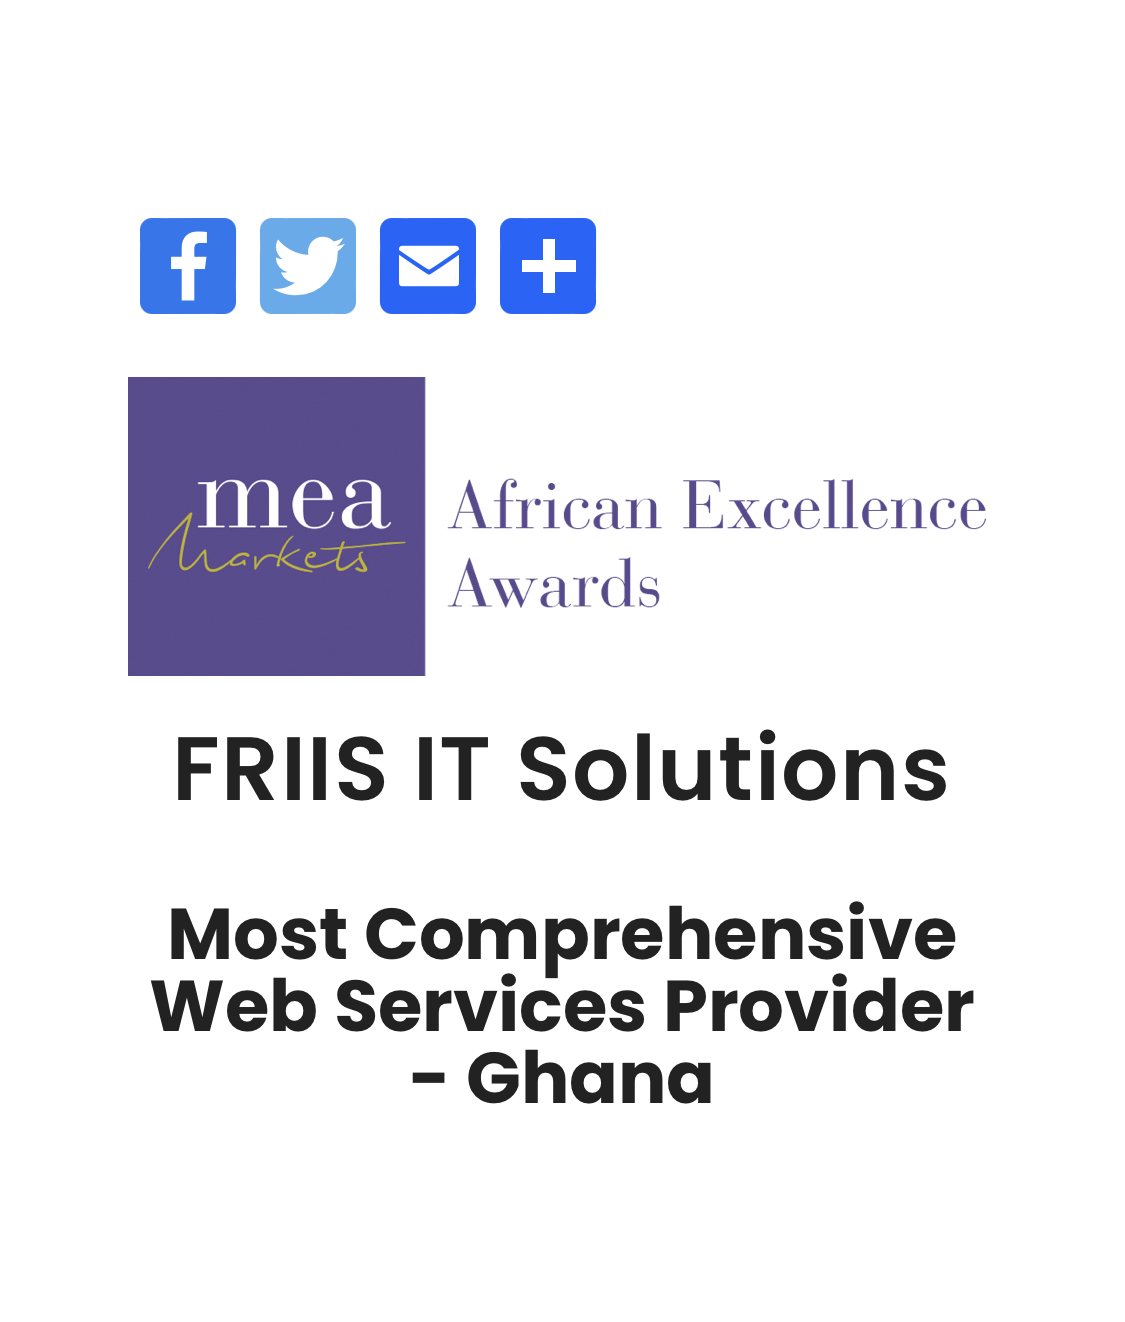 FRIIS IT Solutions wins the Most Comprehensive Web Services Provider – Ghana 🇬🇭 at the African Excellence Awards 2021